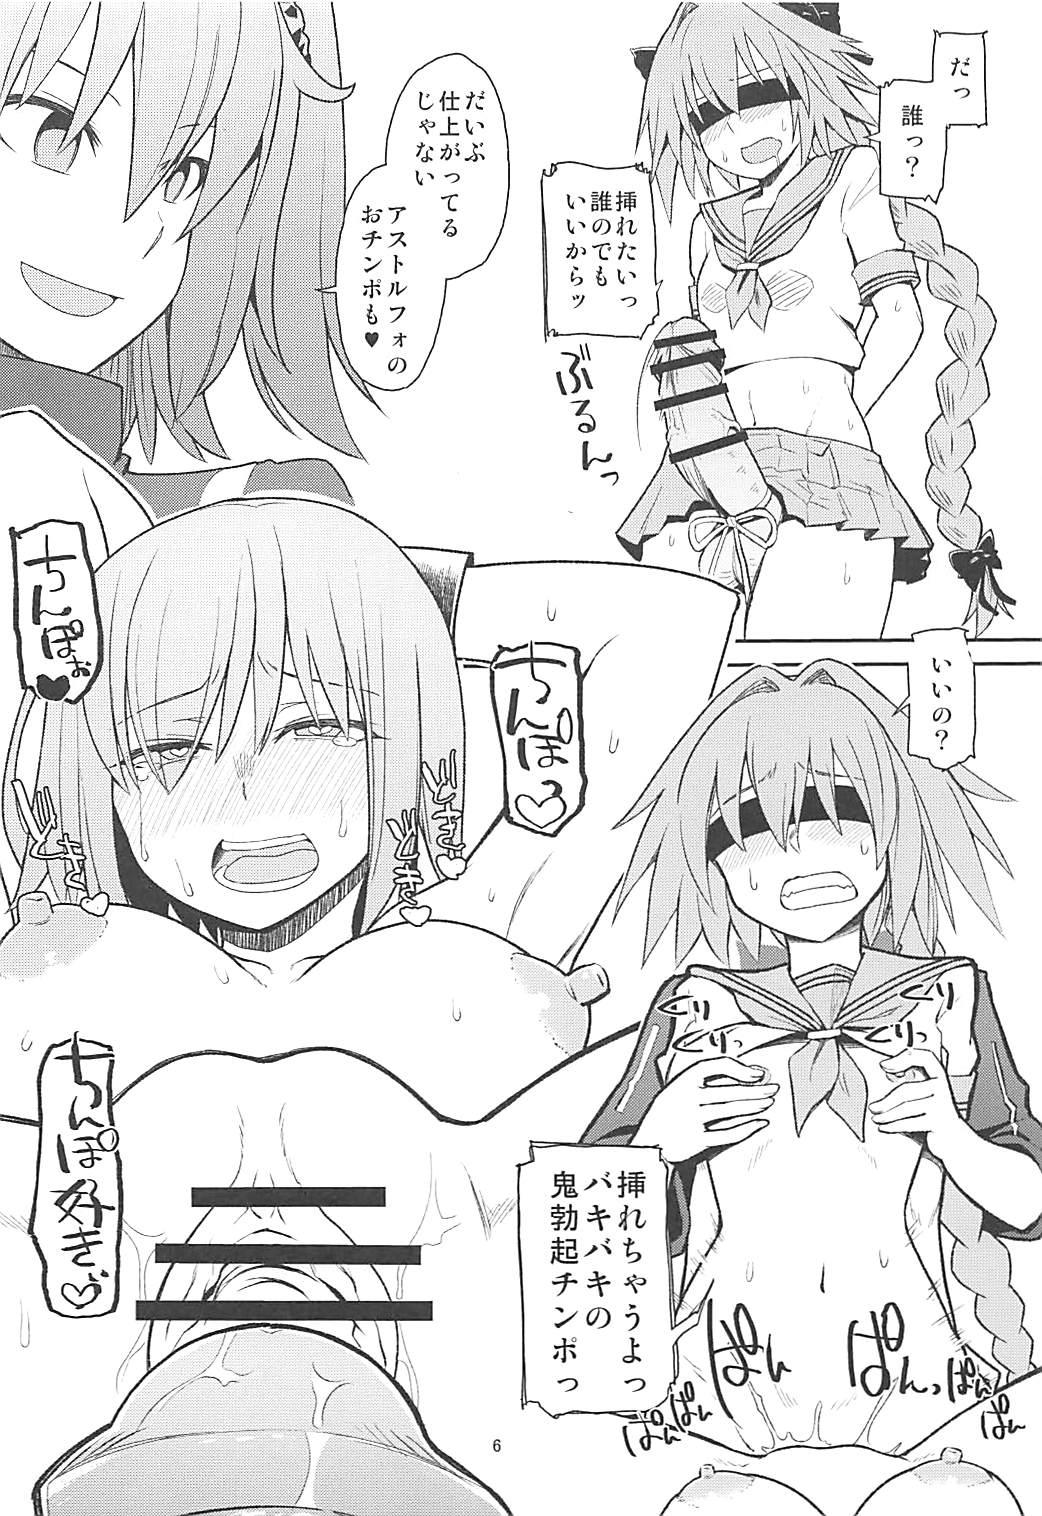 Porno 18 Tsumeawase - Fate grand order Blows - Page 5